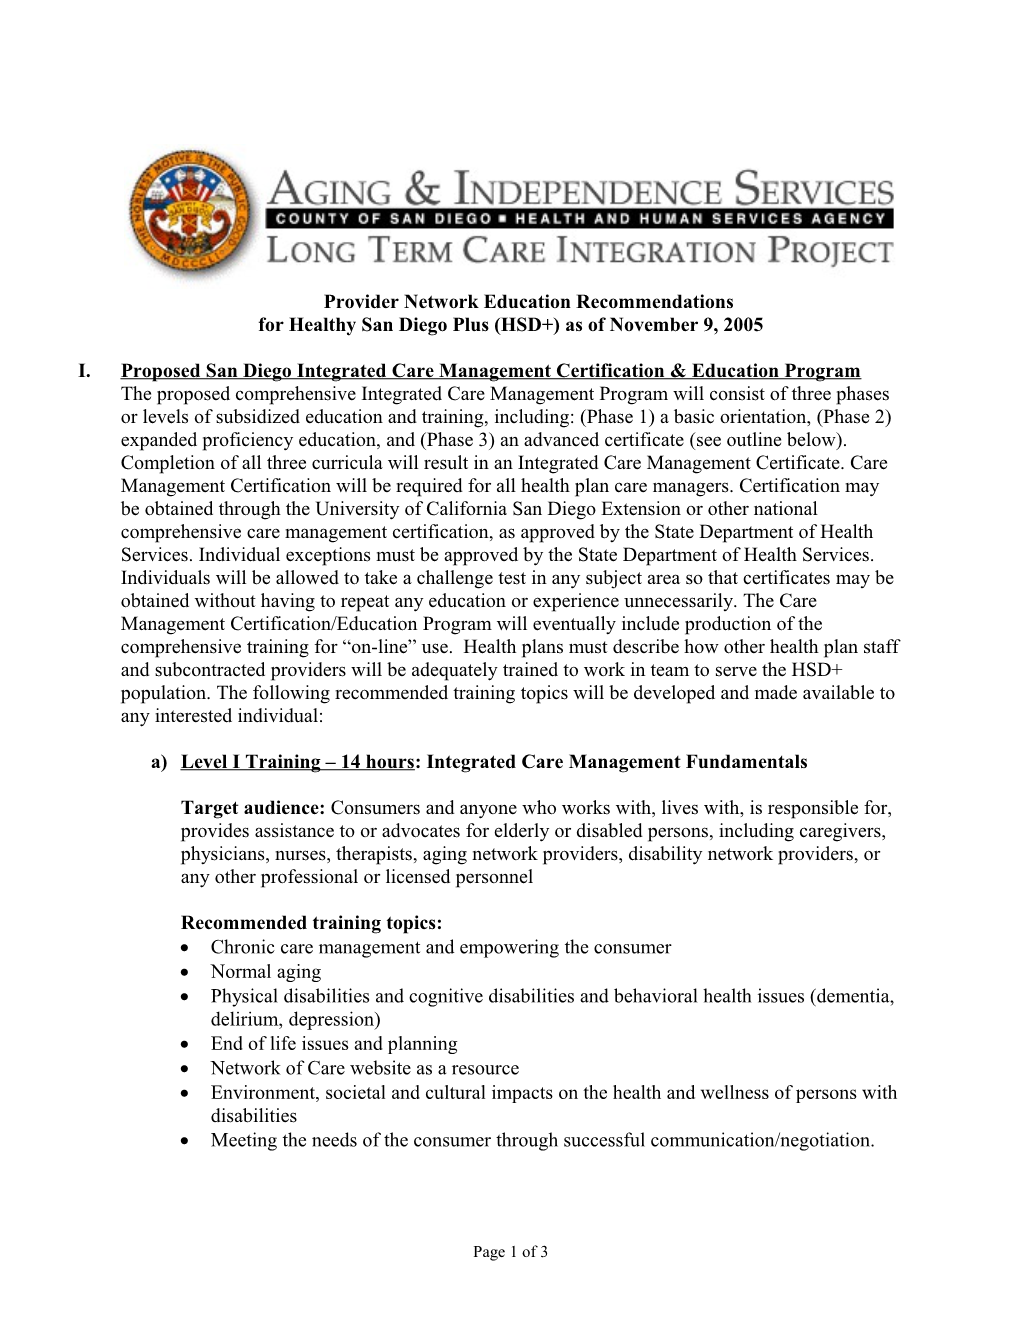 ATTACHMENT III: Proposed San Diego Integrated Care Management Education Program